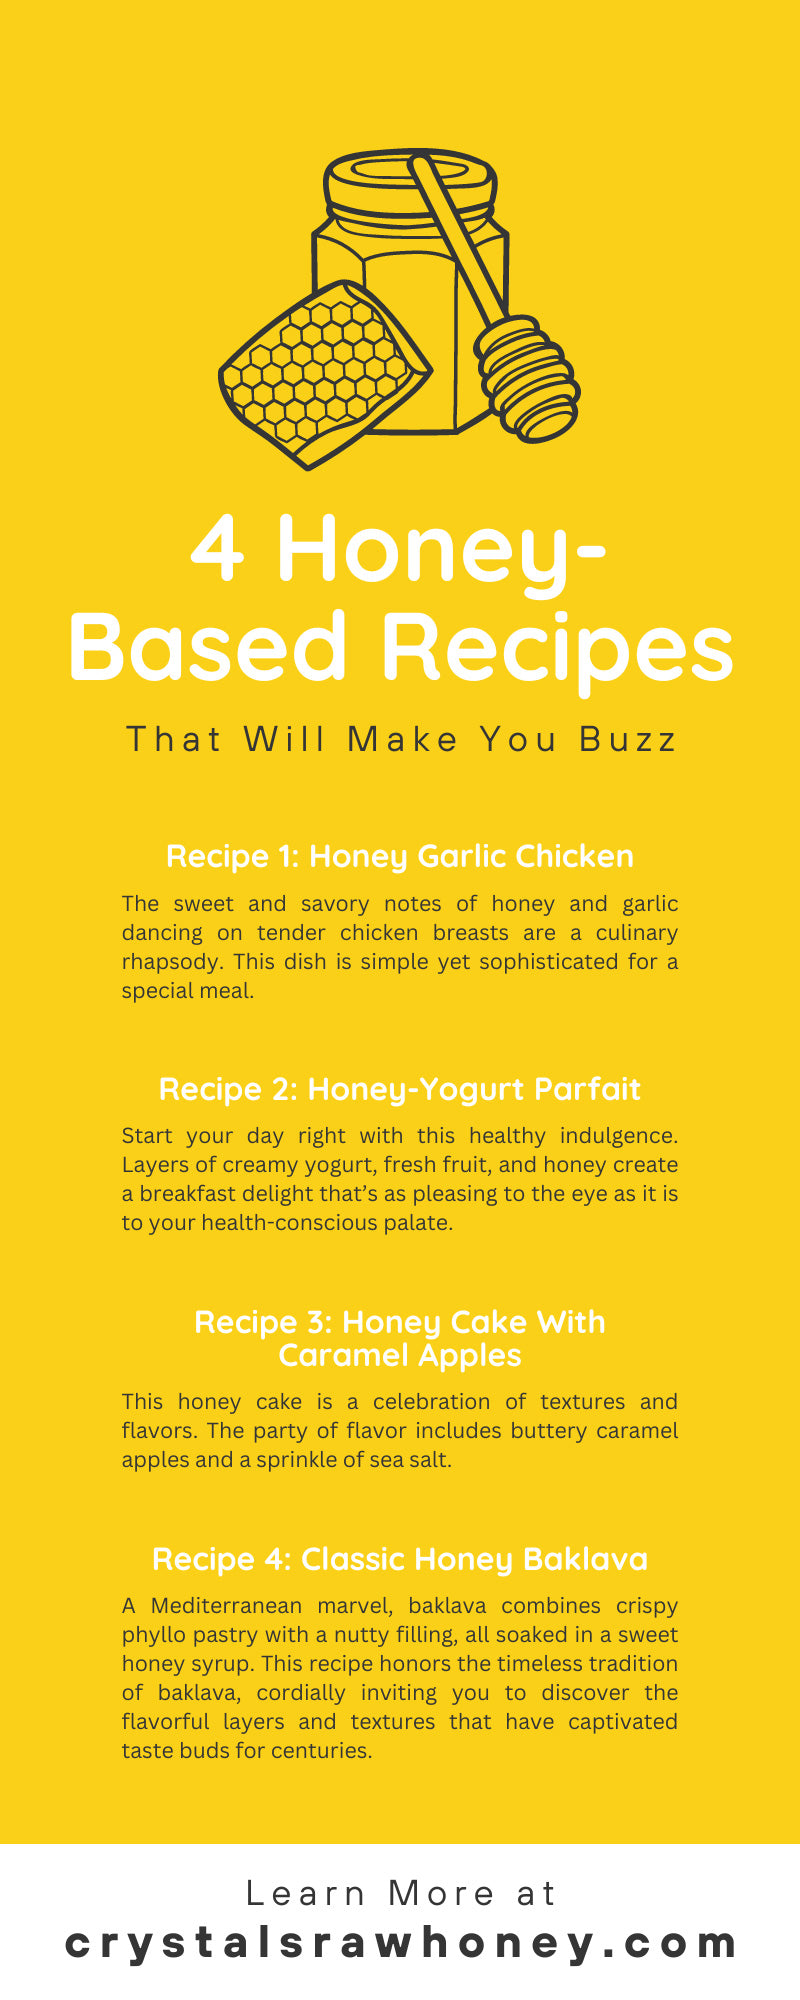 4 Honey-Based Recipes That Will Make You Buzz